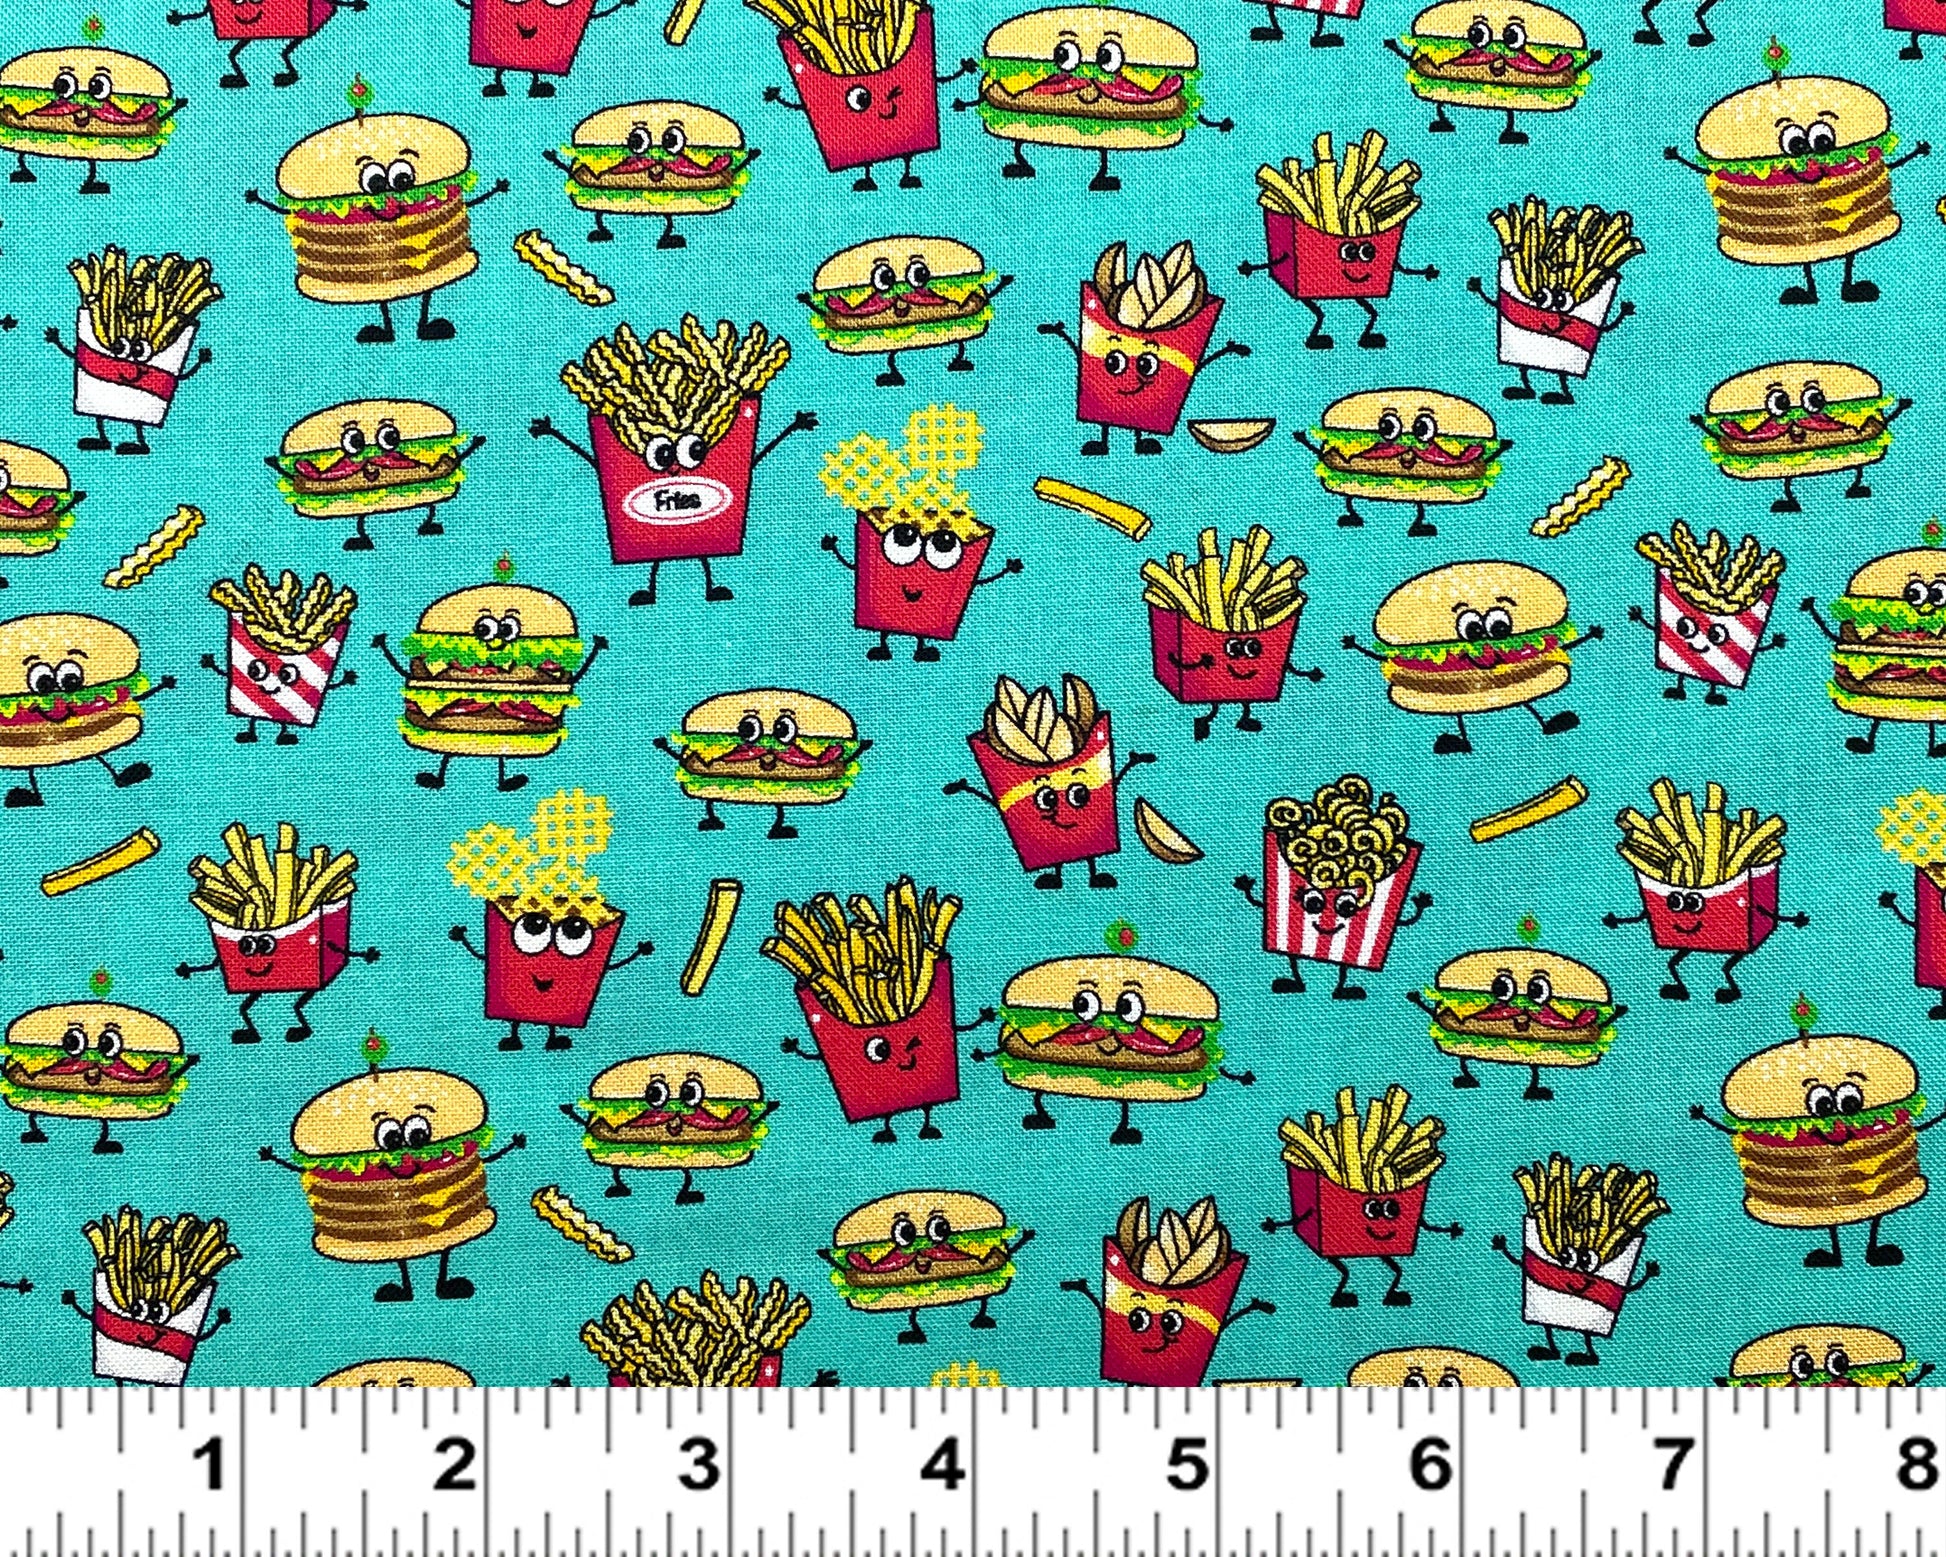 Hamburger fabric - Burger and Fries - Drive Thru Snacks by Freckle & Lollie - 100% Cotton Fabric - Food fabric by the yard - Ships NEXT DAY